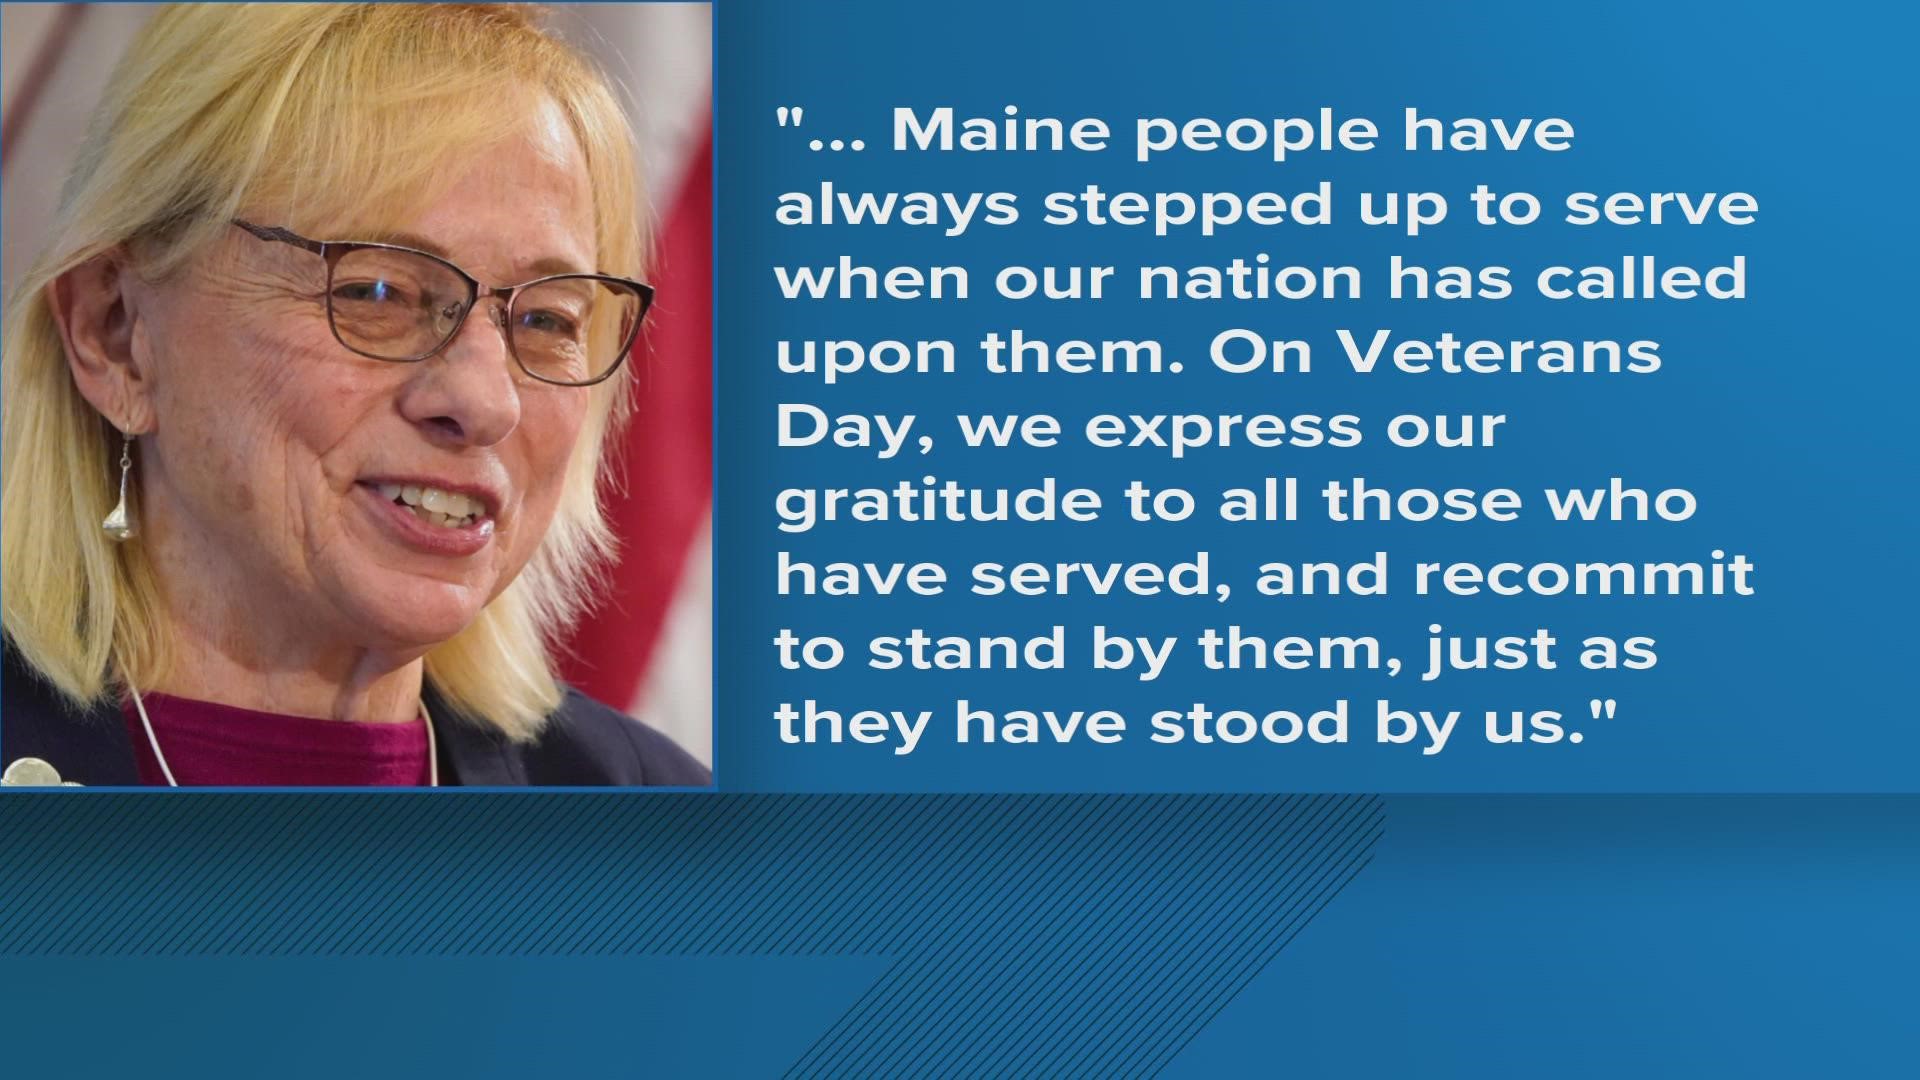 Alike much of the state who stepped up to honor the state's veterans, Gov. Janet Mills expressed her thanks.